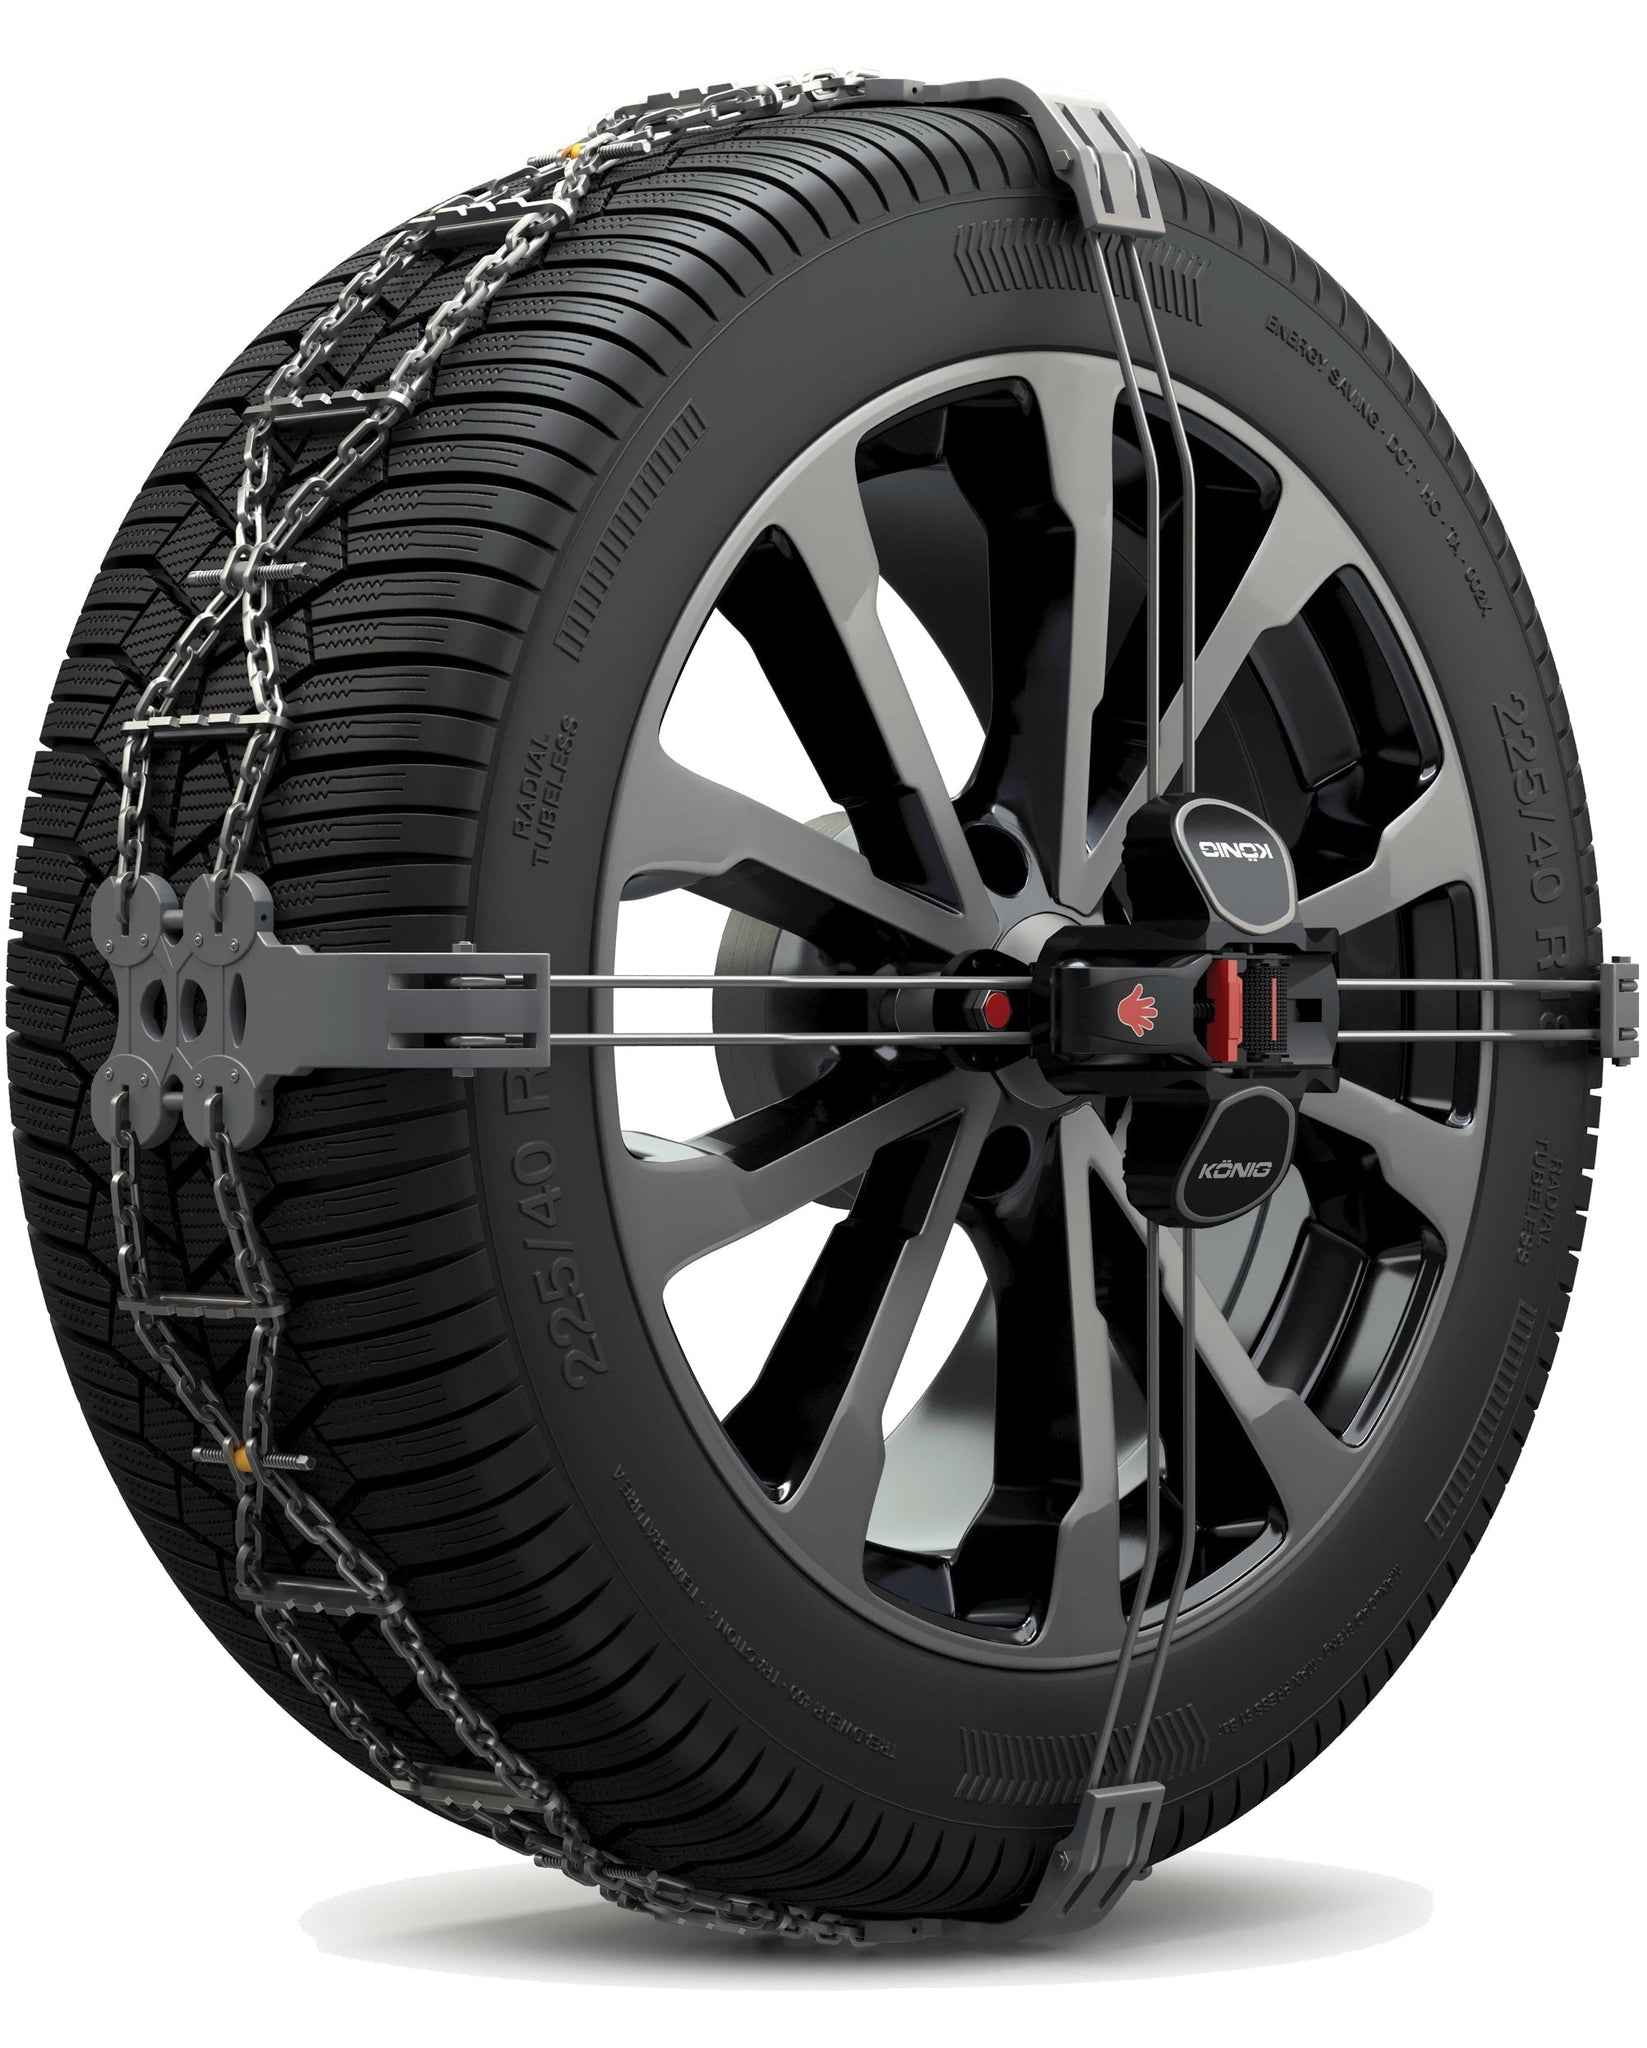 Snow chains for the Tesla Model 3